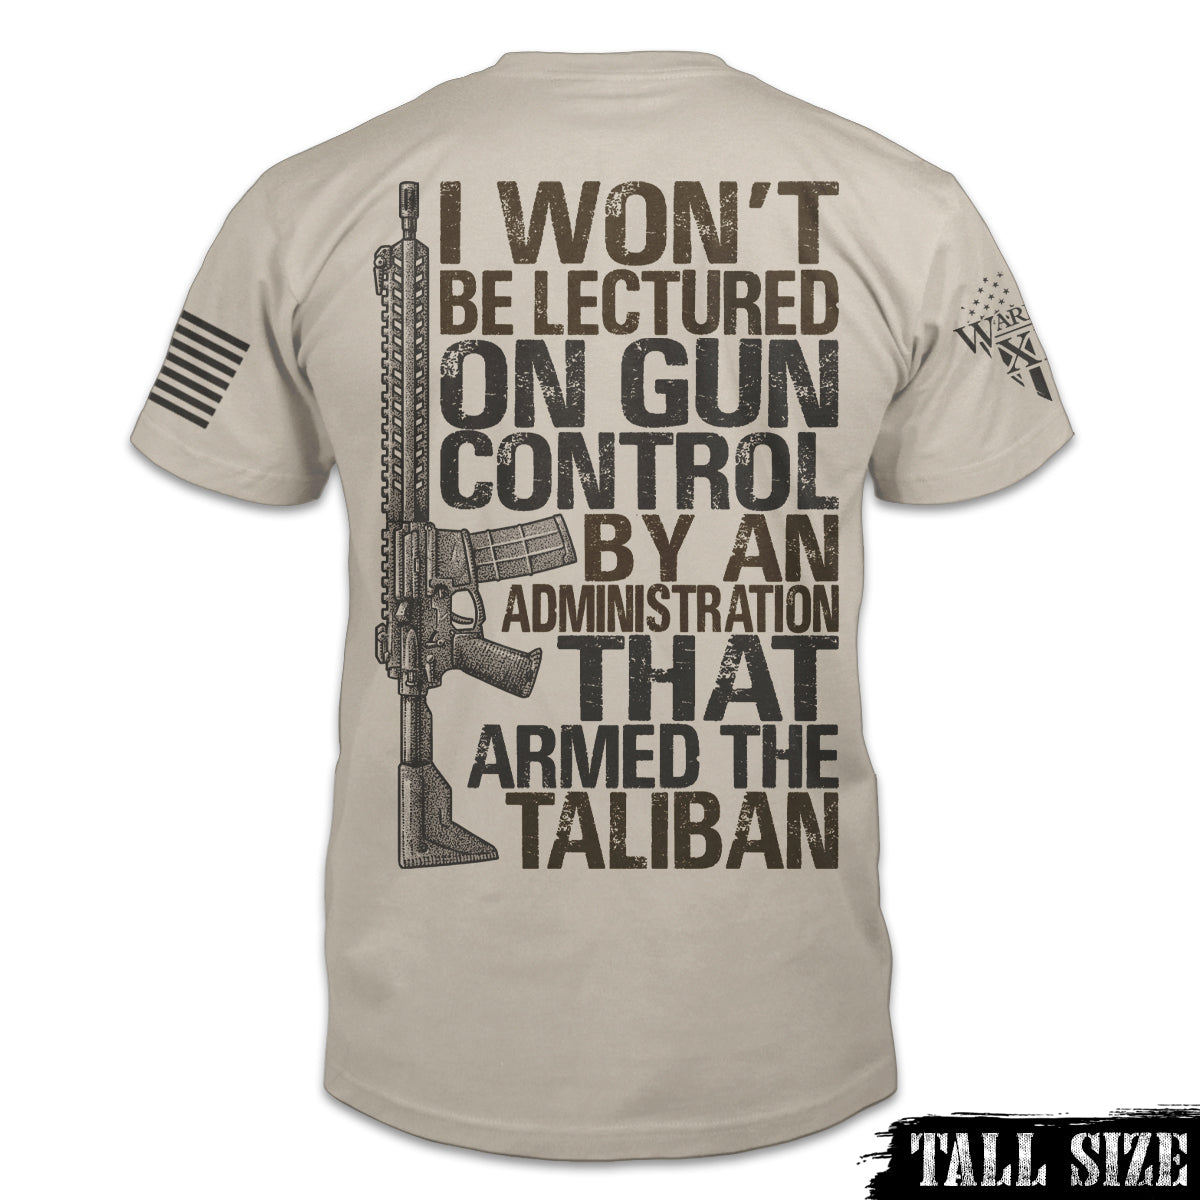 A light tan tall size shirt with the words 'I won't be lectured on gun control by an administration that armed the Taliban" with an AR15 printed on the back of the shirt.